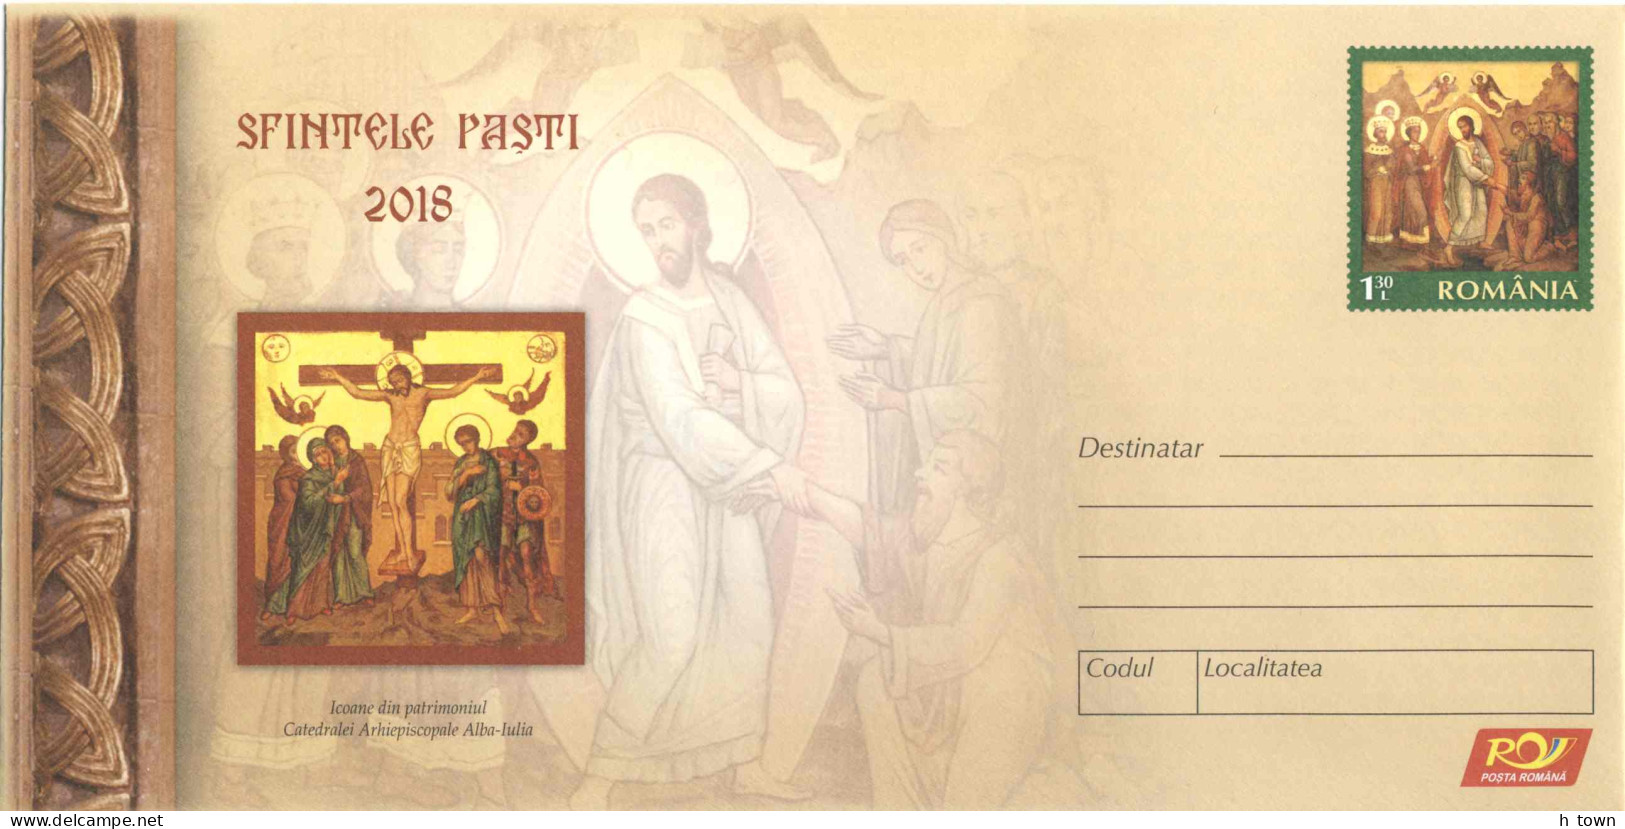 824  Icône, Pâques: PAP 2018  - Icon Of The Eastern Orthodox Church: Postal Stationery Cover - Schilderijen